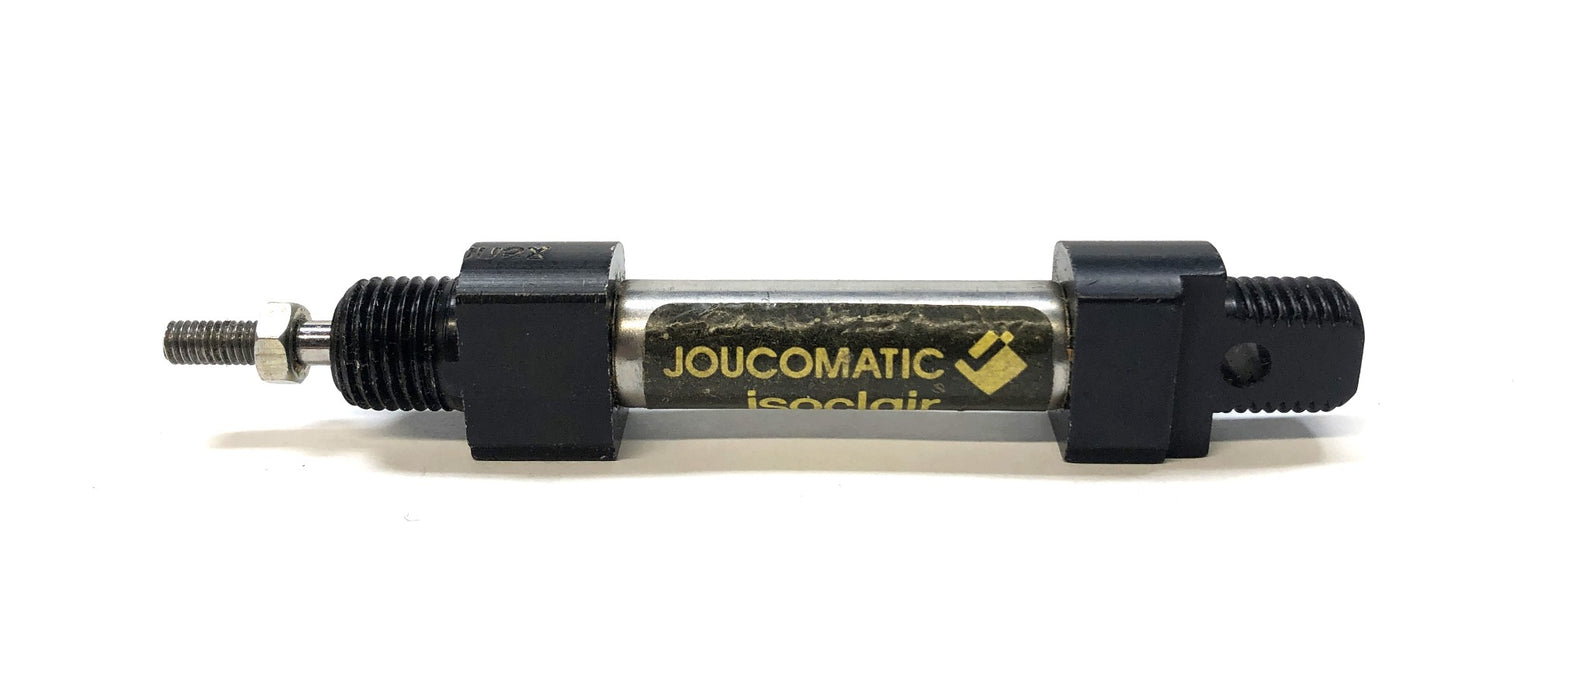 Joucomatic Pneumatic Isoclair Round Cylinder 43550336 (C10-AS-17DM) NOS